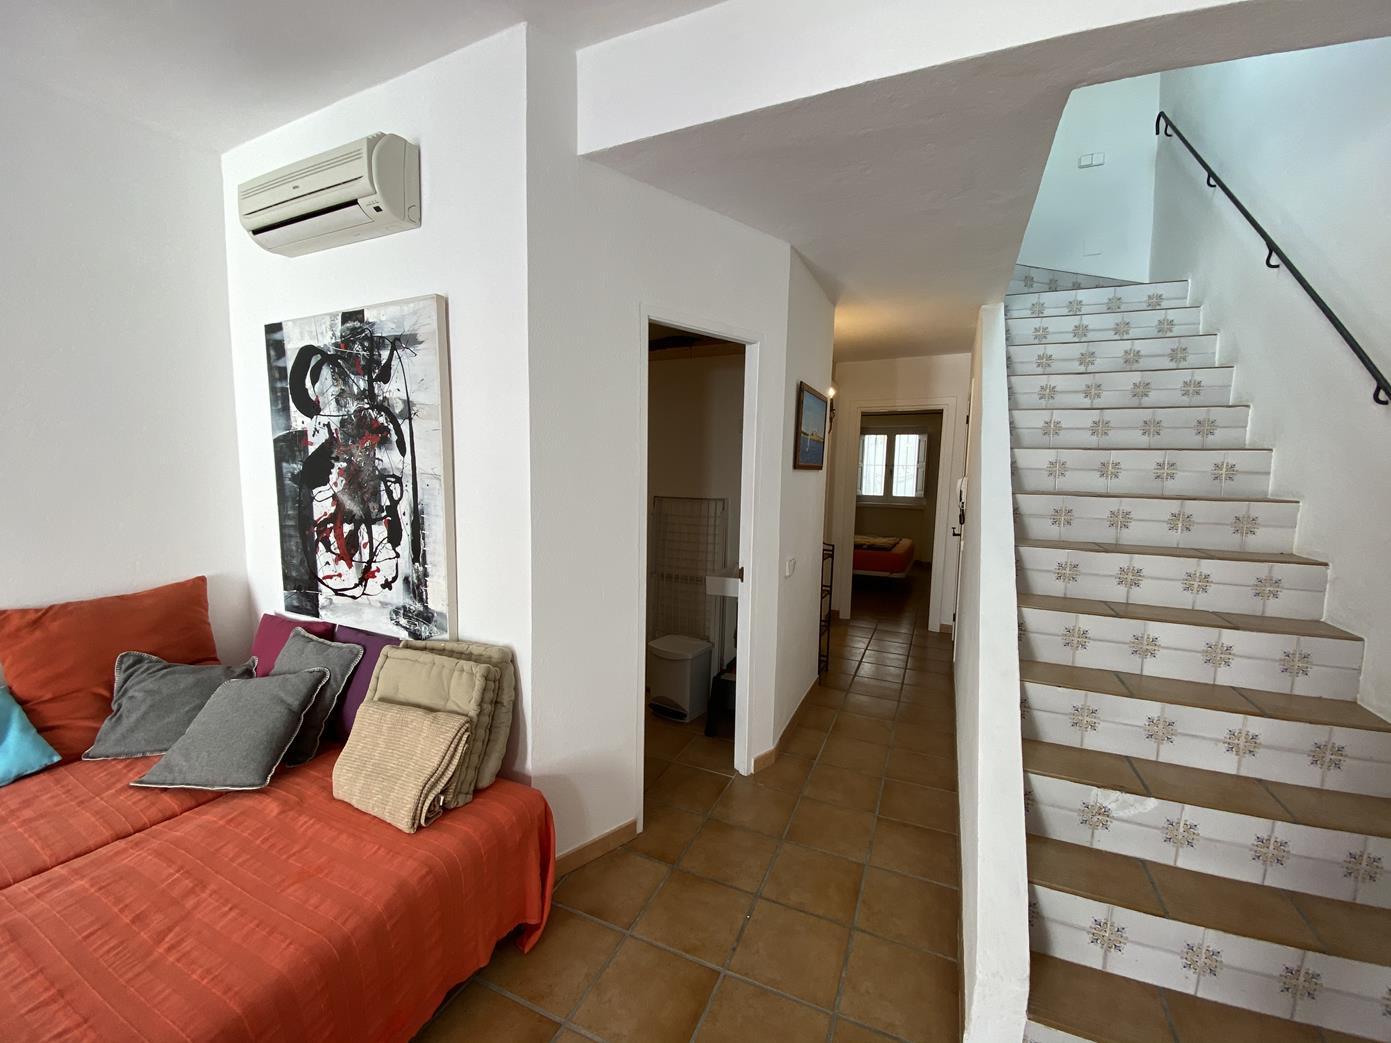 Duplex apartment in the lower old town of Ibiza